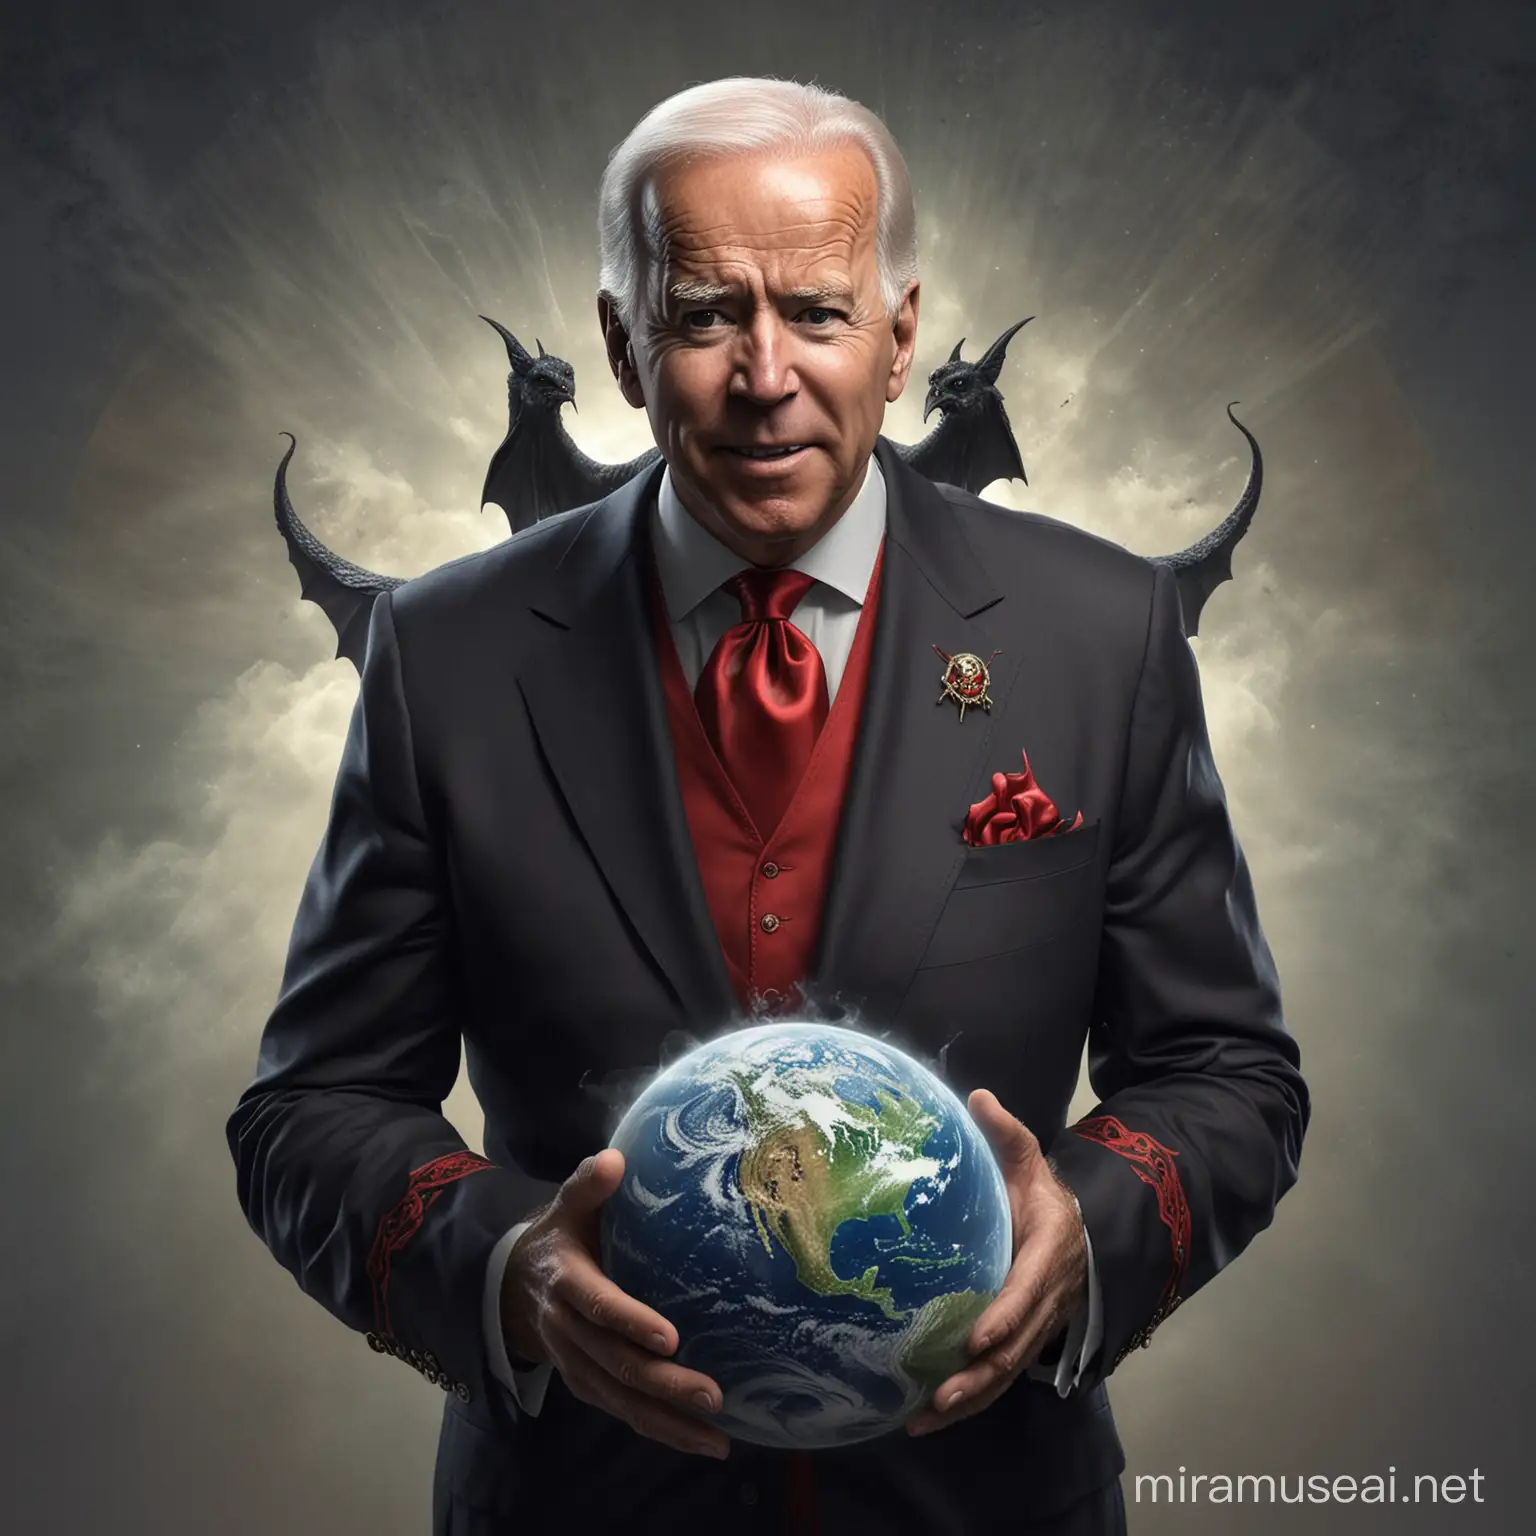 generate a realistic, very detailed image that shows joe biden as a devil wearing a magician uniform holding an earth